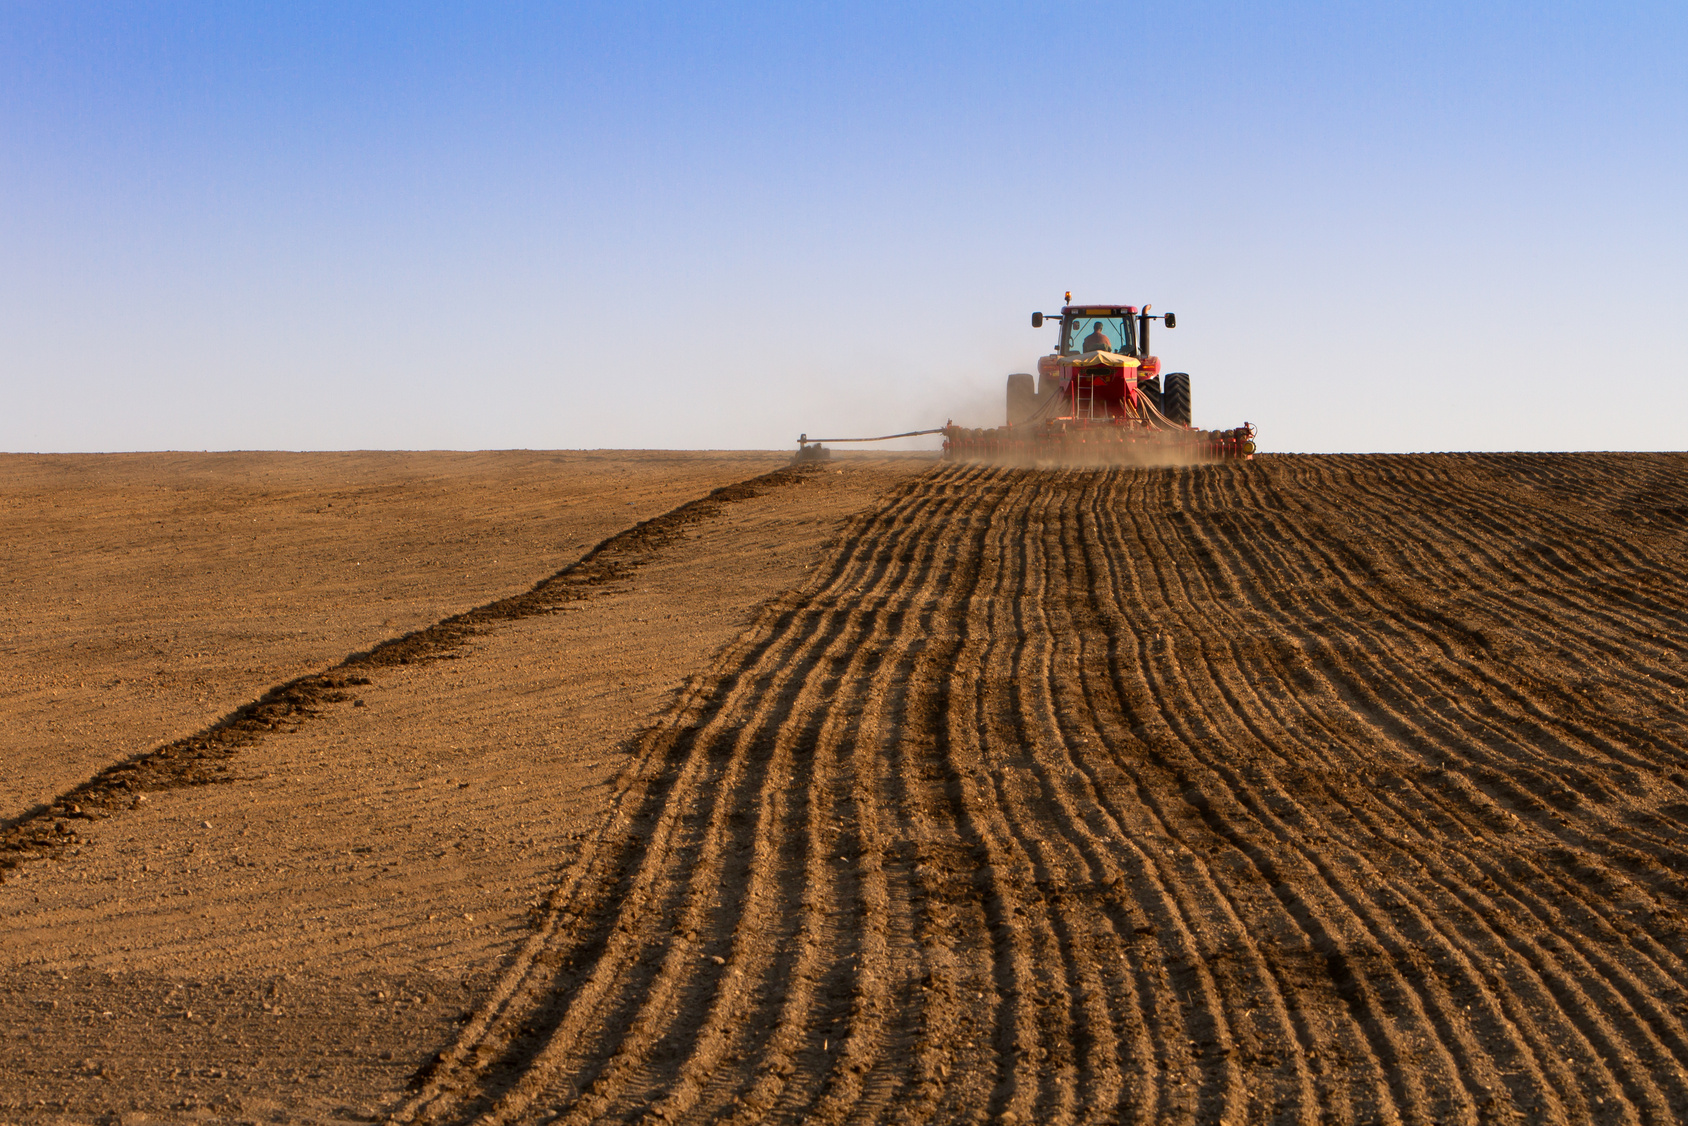 Dirt field with a tractor plowing it